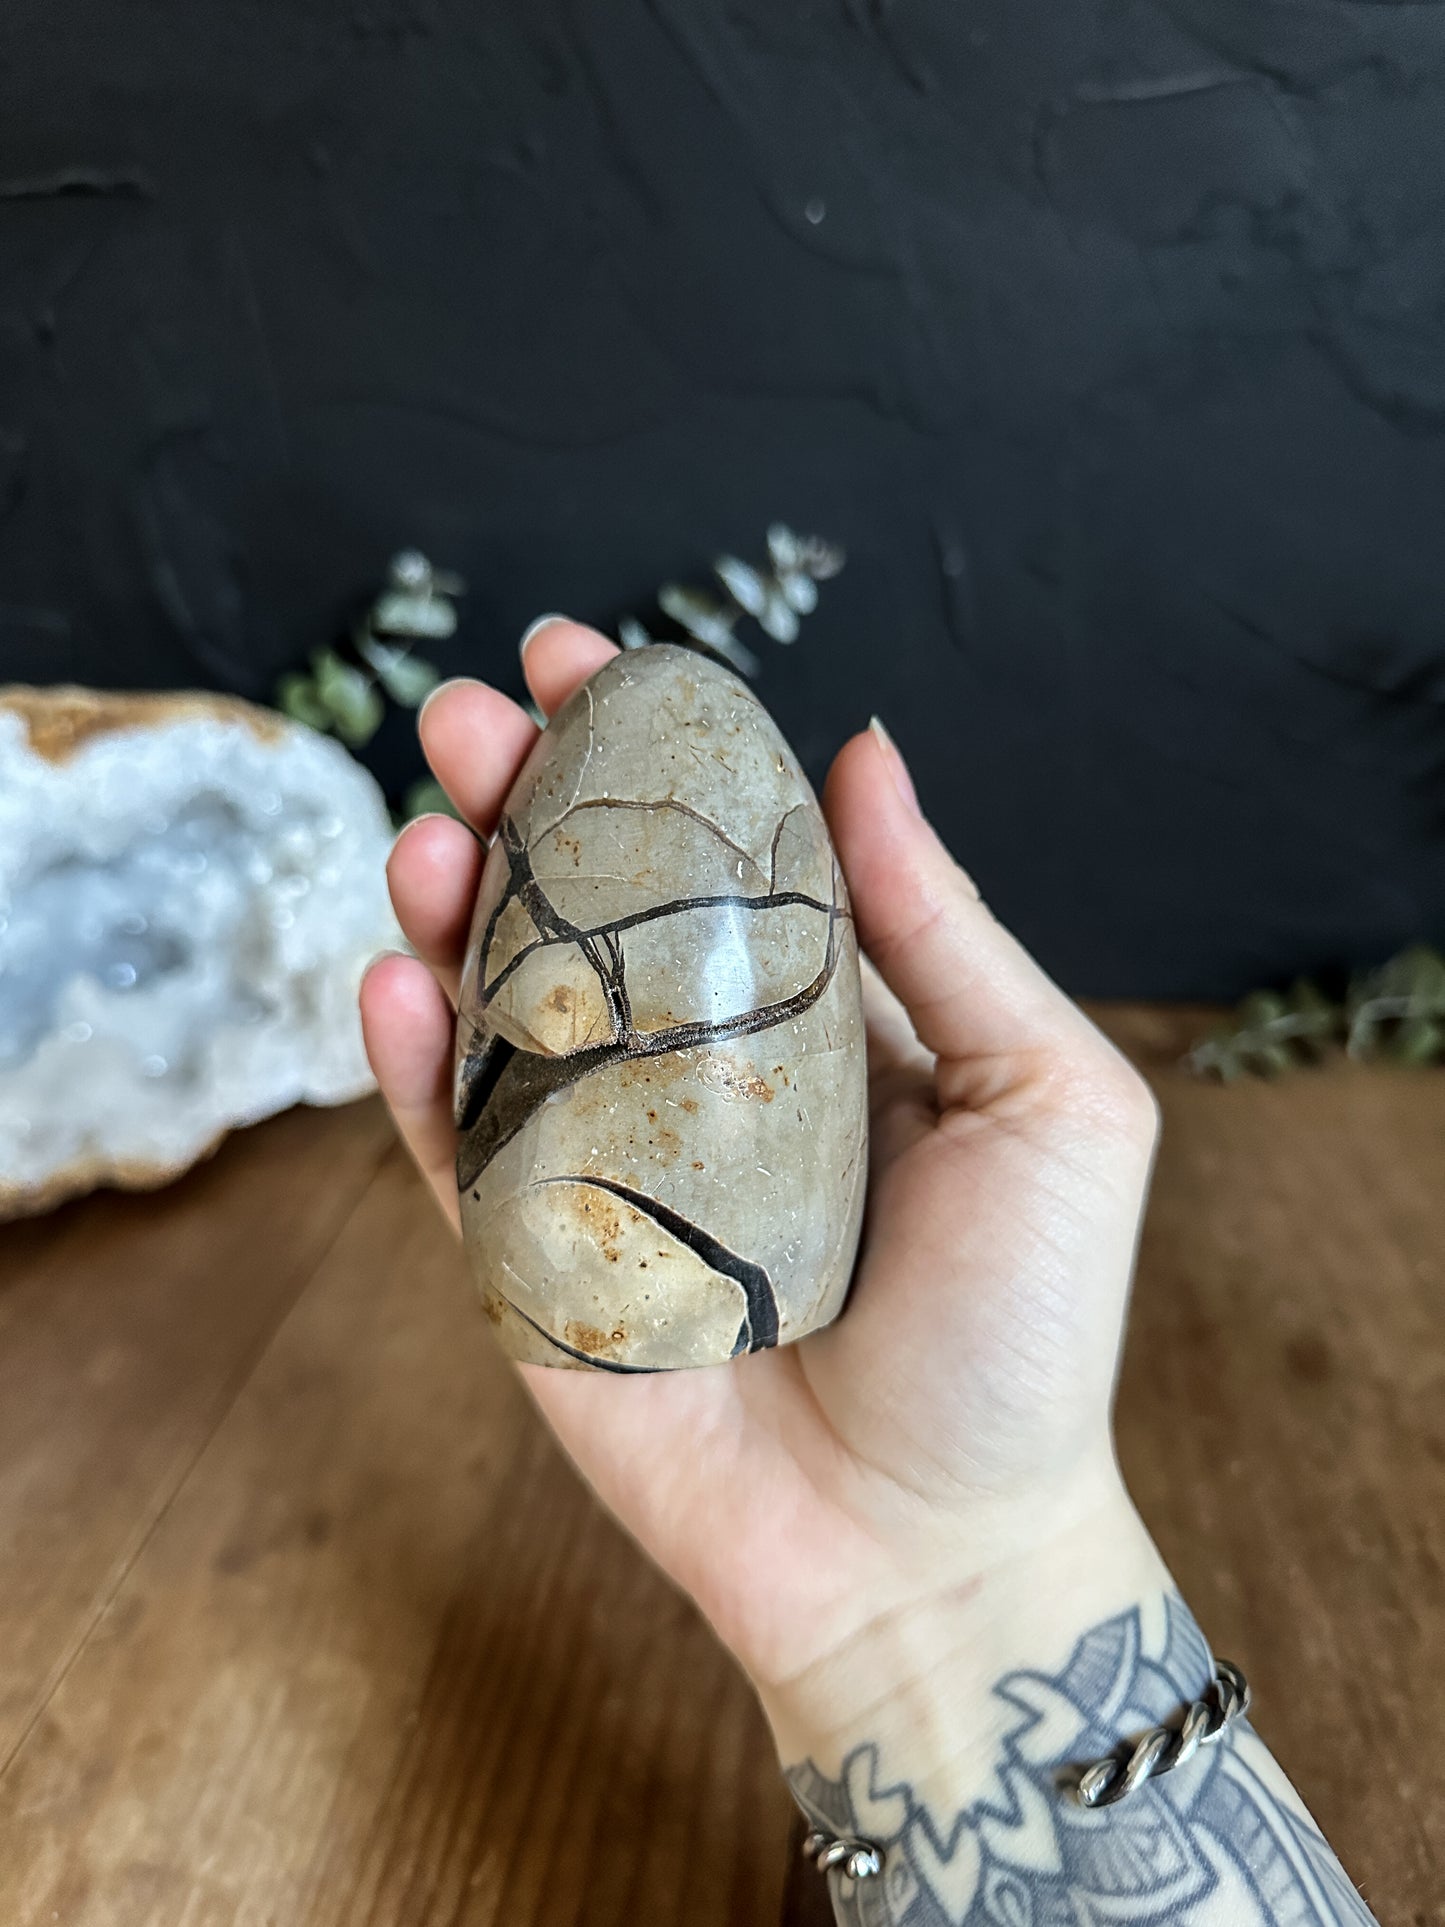 Septarian Geode with Calcite Inclusions - 01